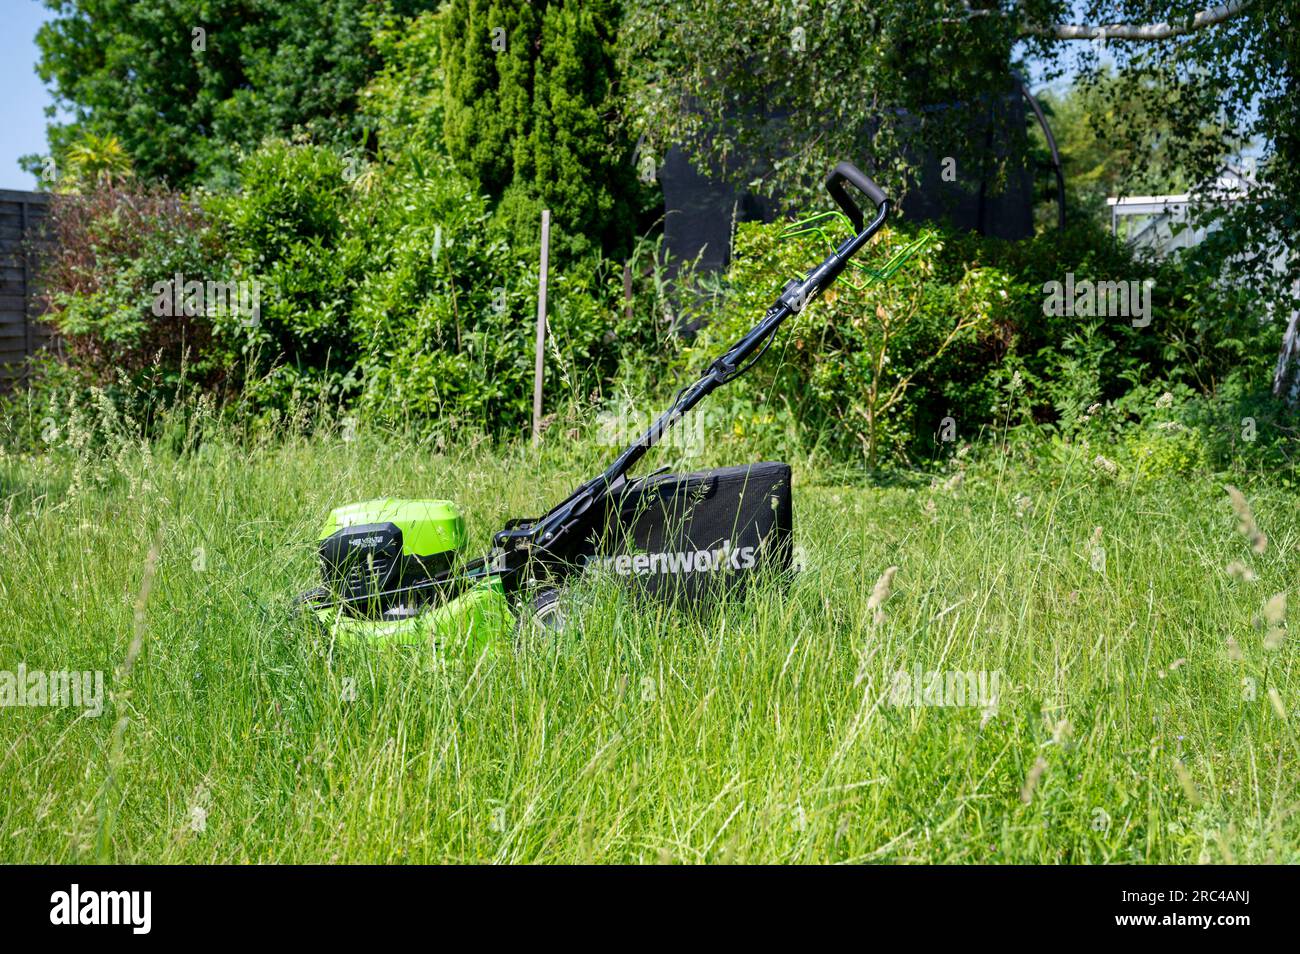 A Greenworks lawnmower cutting a grass lawn after no mow May when the grass is long. Stock Photo